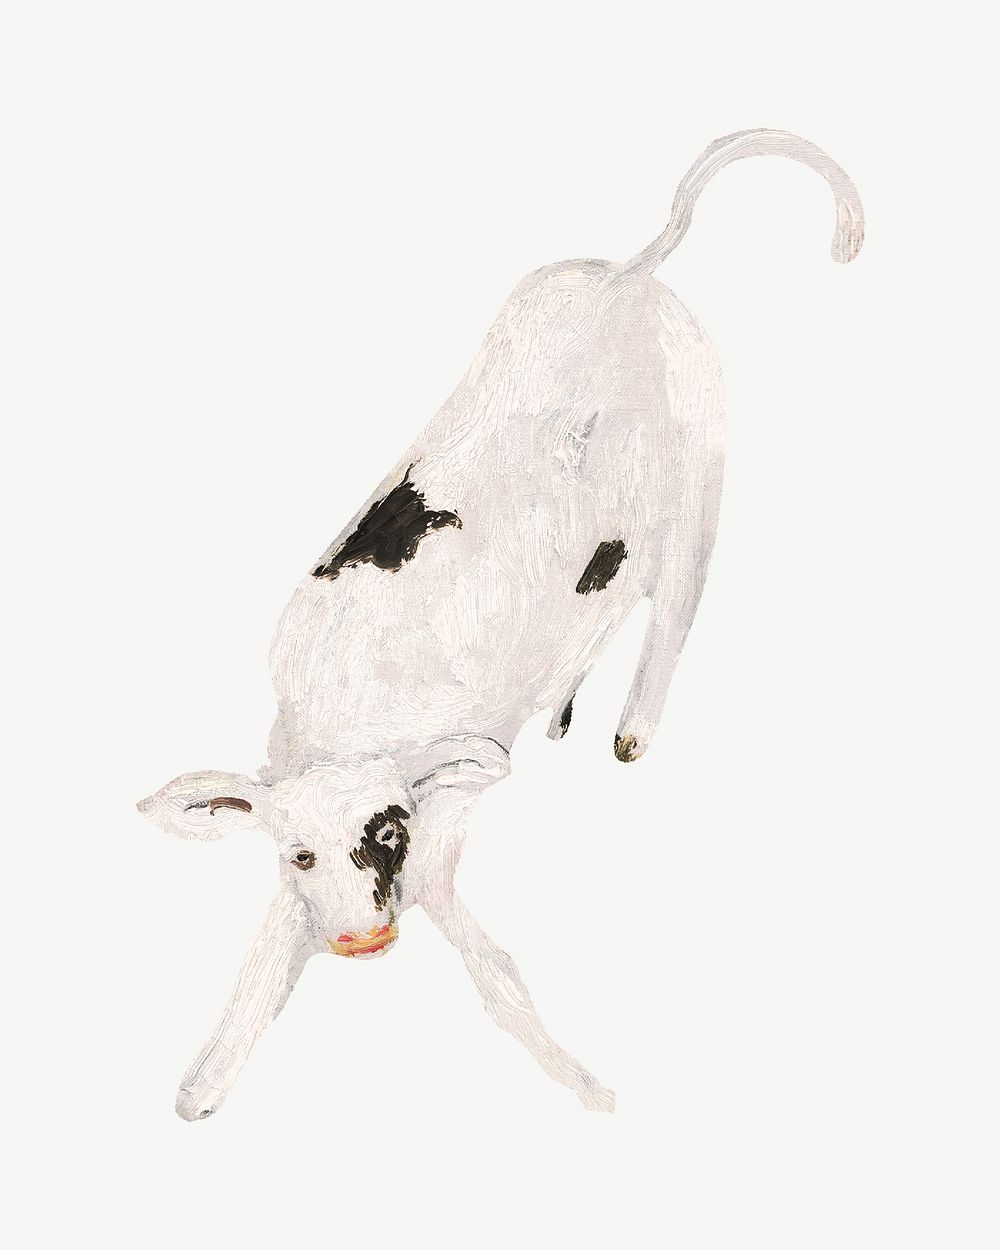 Calf baby cow, animal illustration psd by Cyprian Majernik. Remixed by rawpixel.